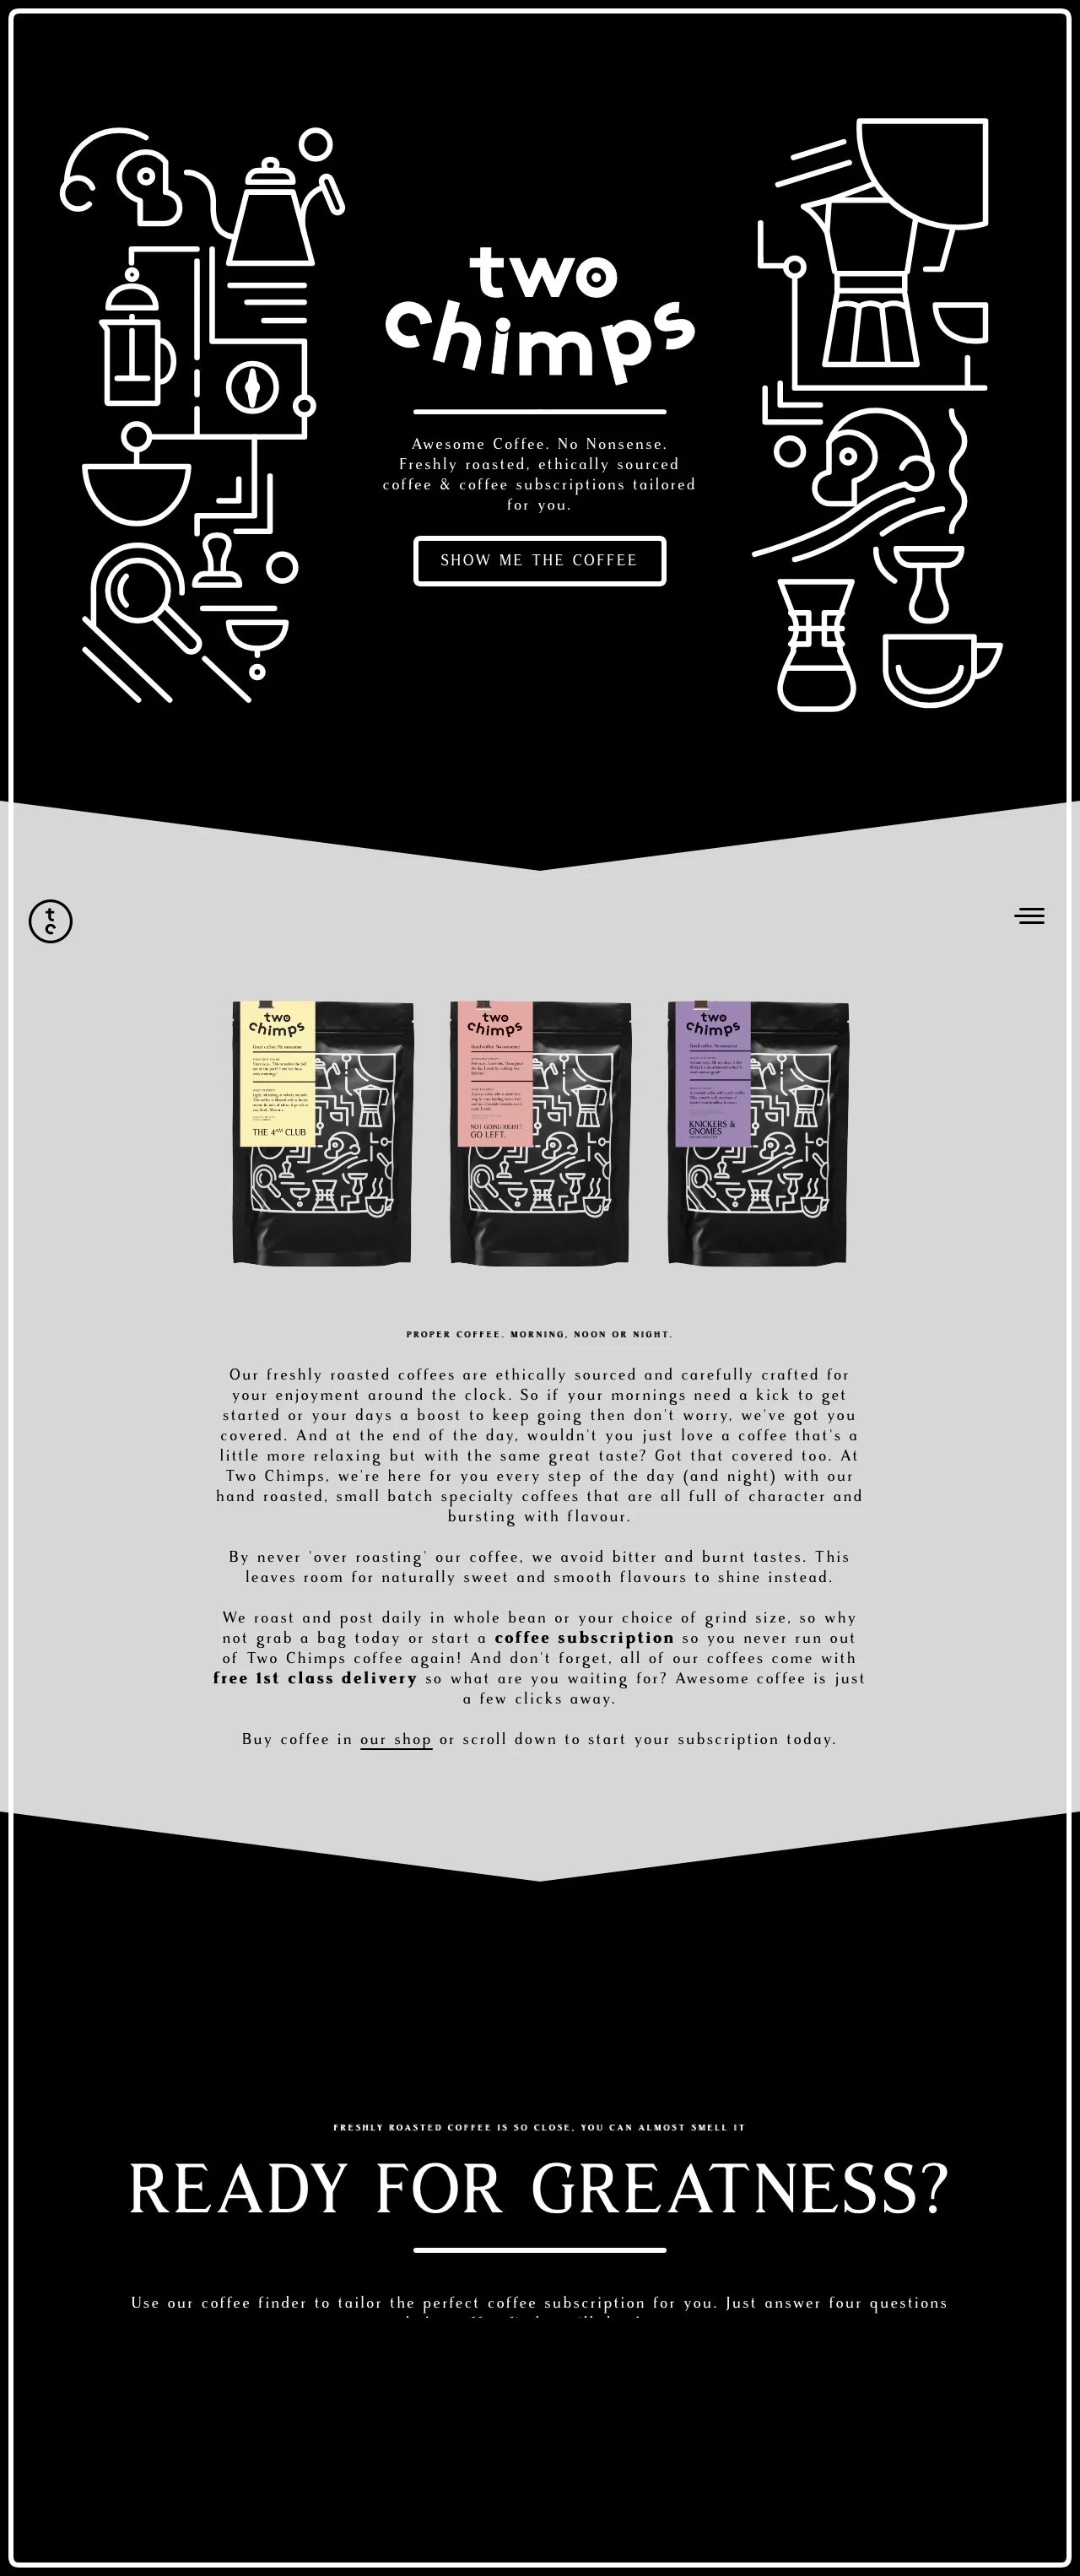 Two Chimps Coffee Landing Page Example: Awesome Coffee. No Nonsense. Freshly roasted, ethically sourced coffee & coffee subscriptions tailored for you.